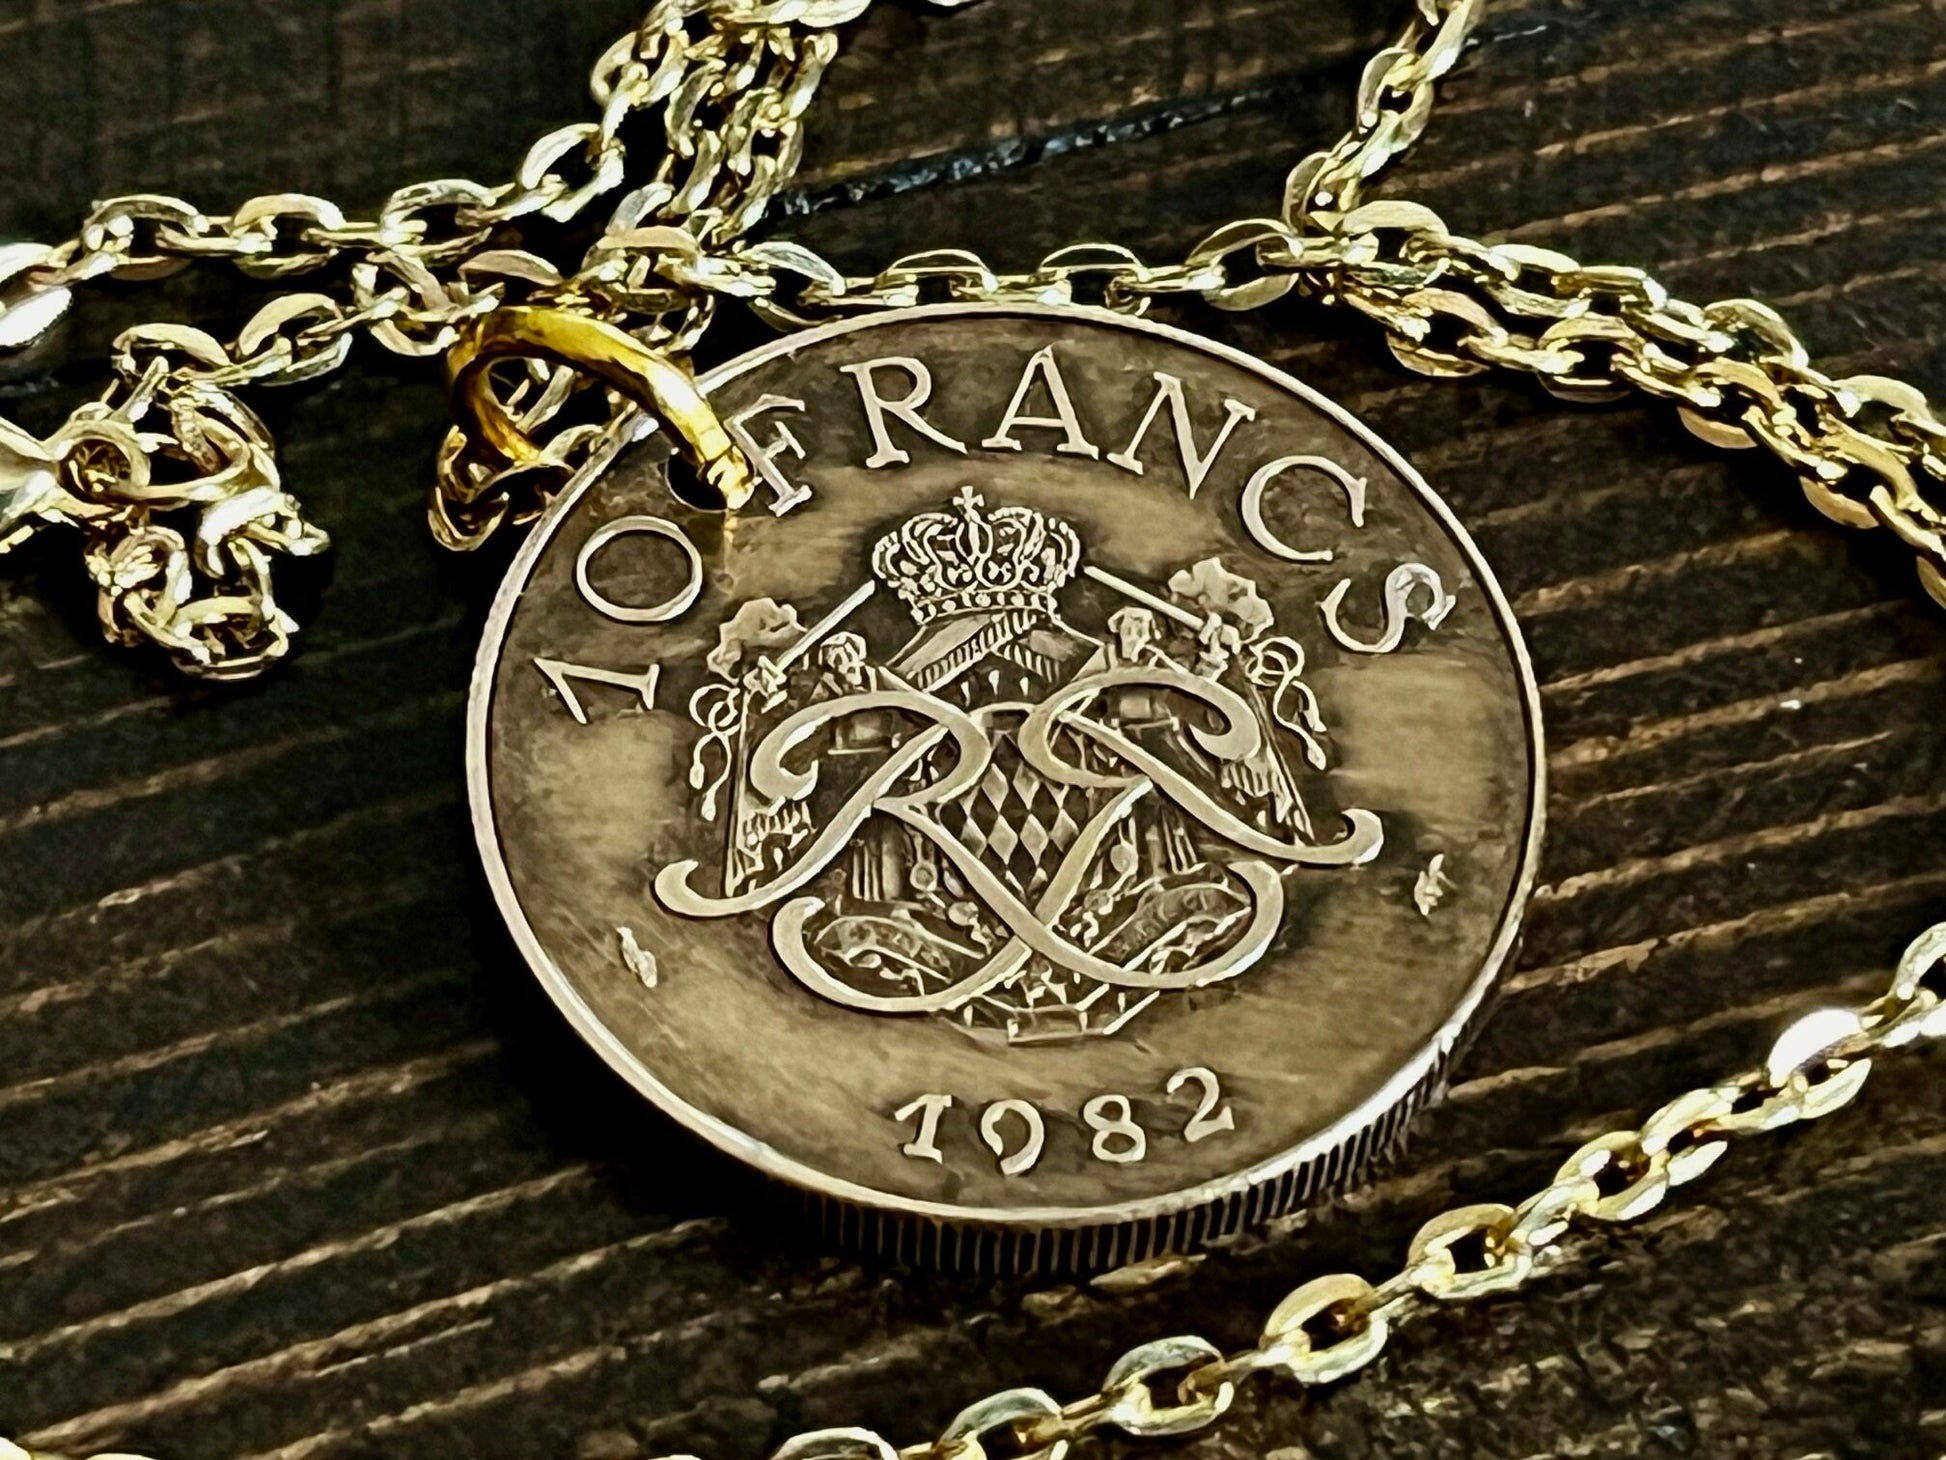 France 10 Francs Coin Pendant Personal Necklace Old Vintage Handmade Jewelry Gift Friend Charm For Him Her World Coin Collector